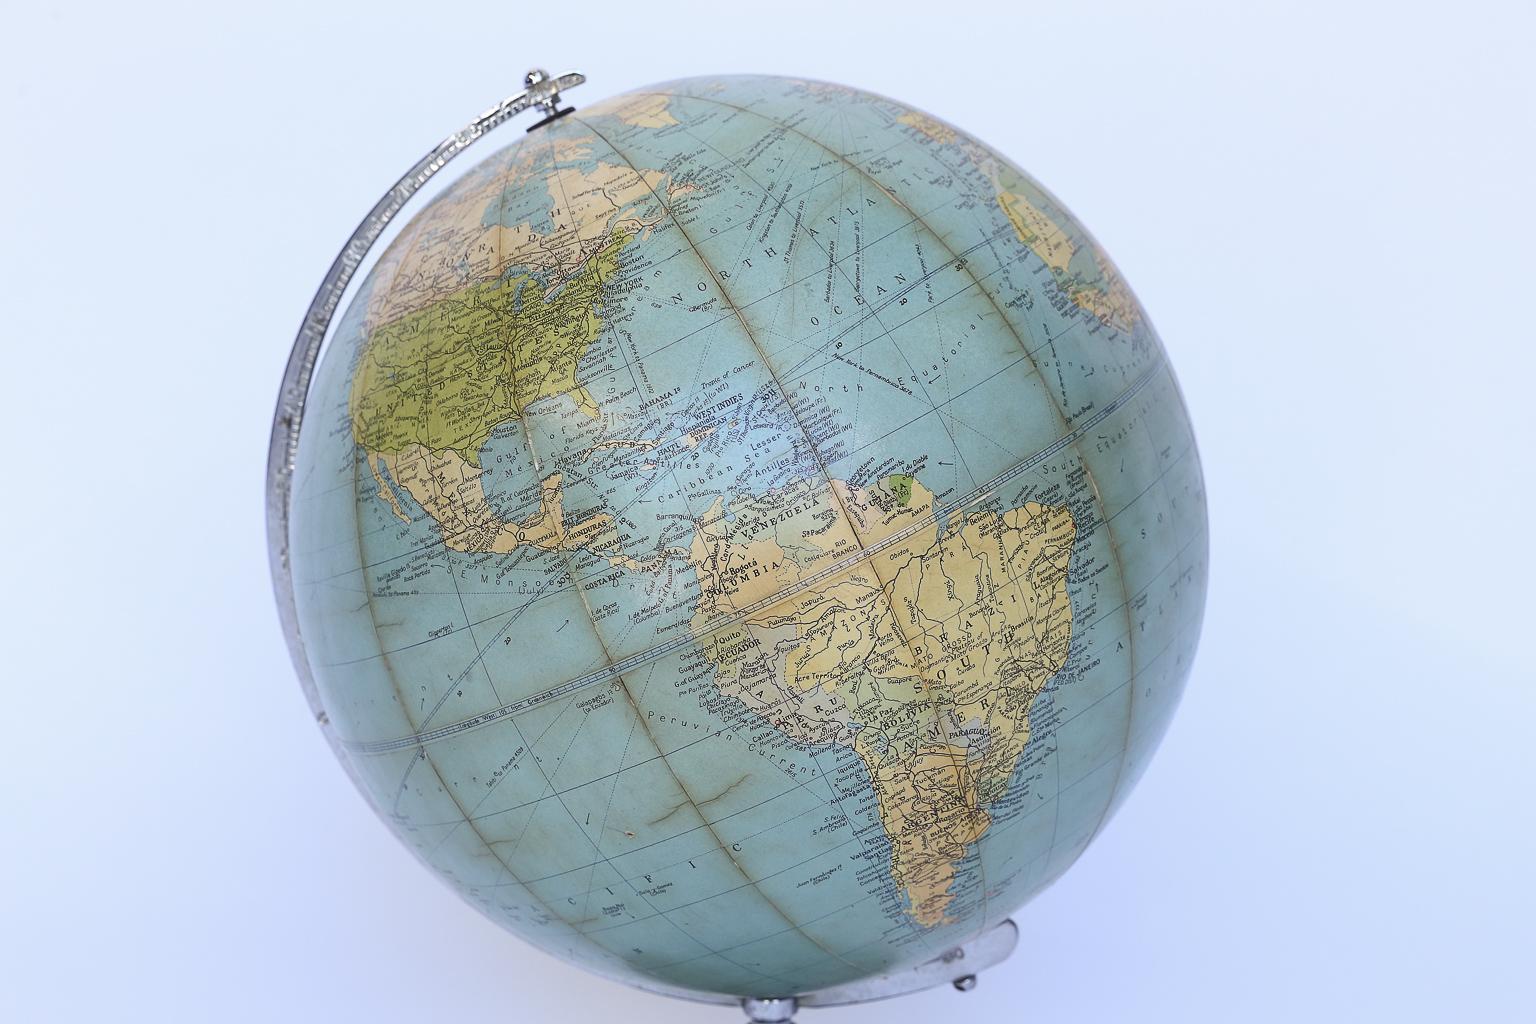 This is a Philips' Challenge Globe copyrighted in 1960. The 13 1/2